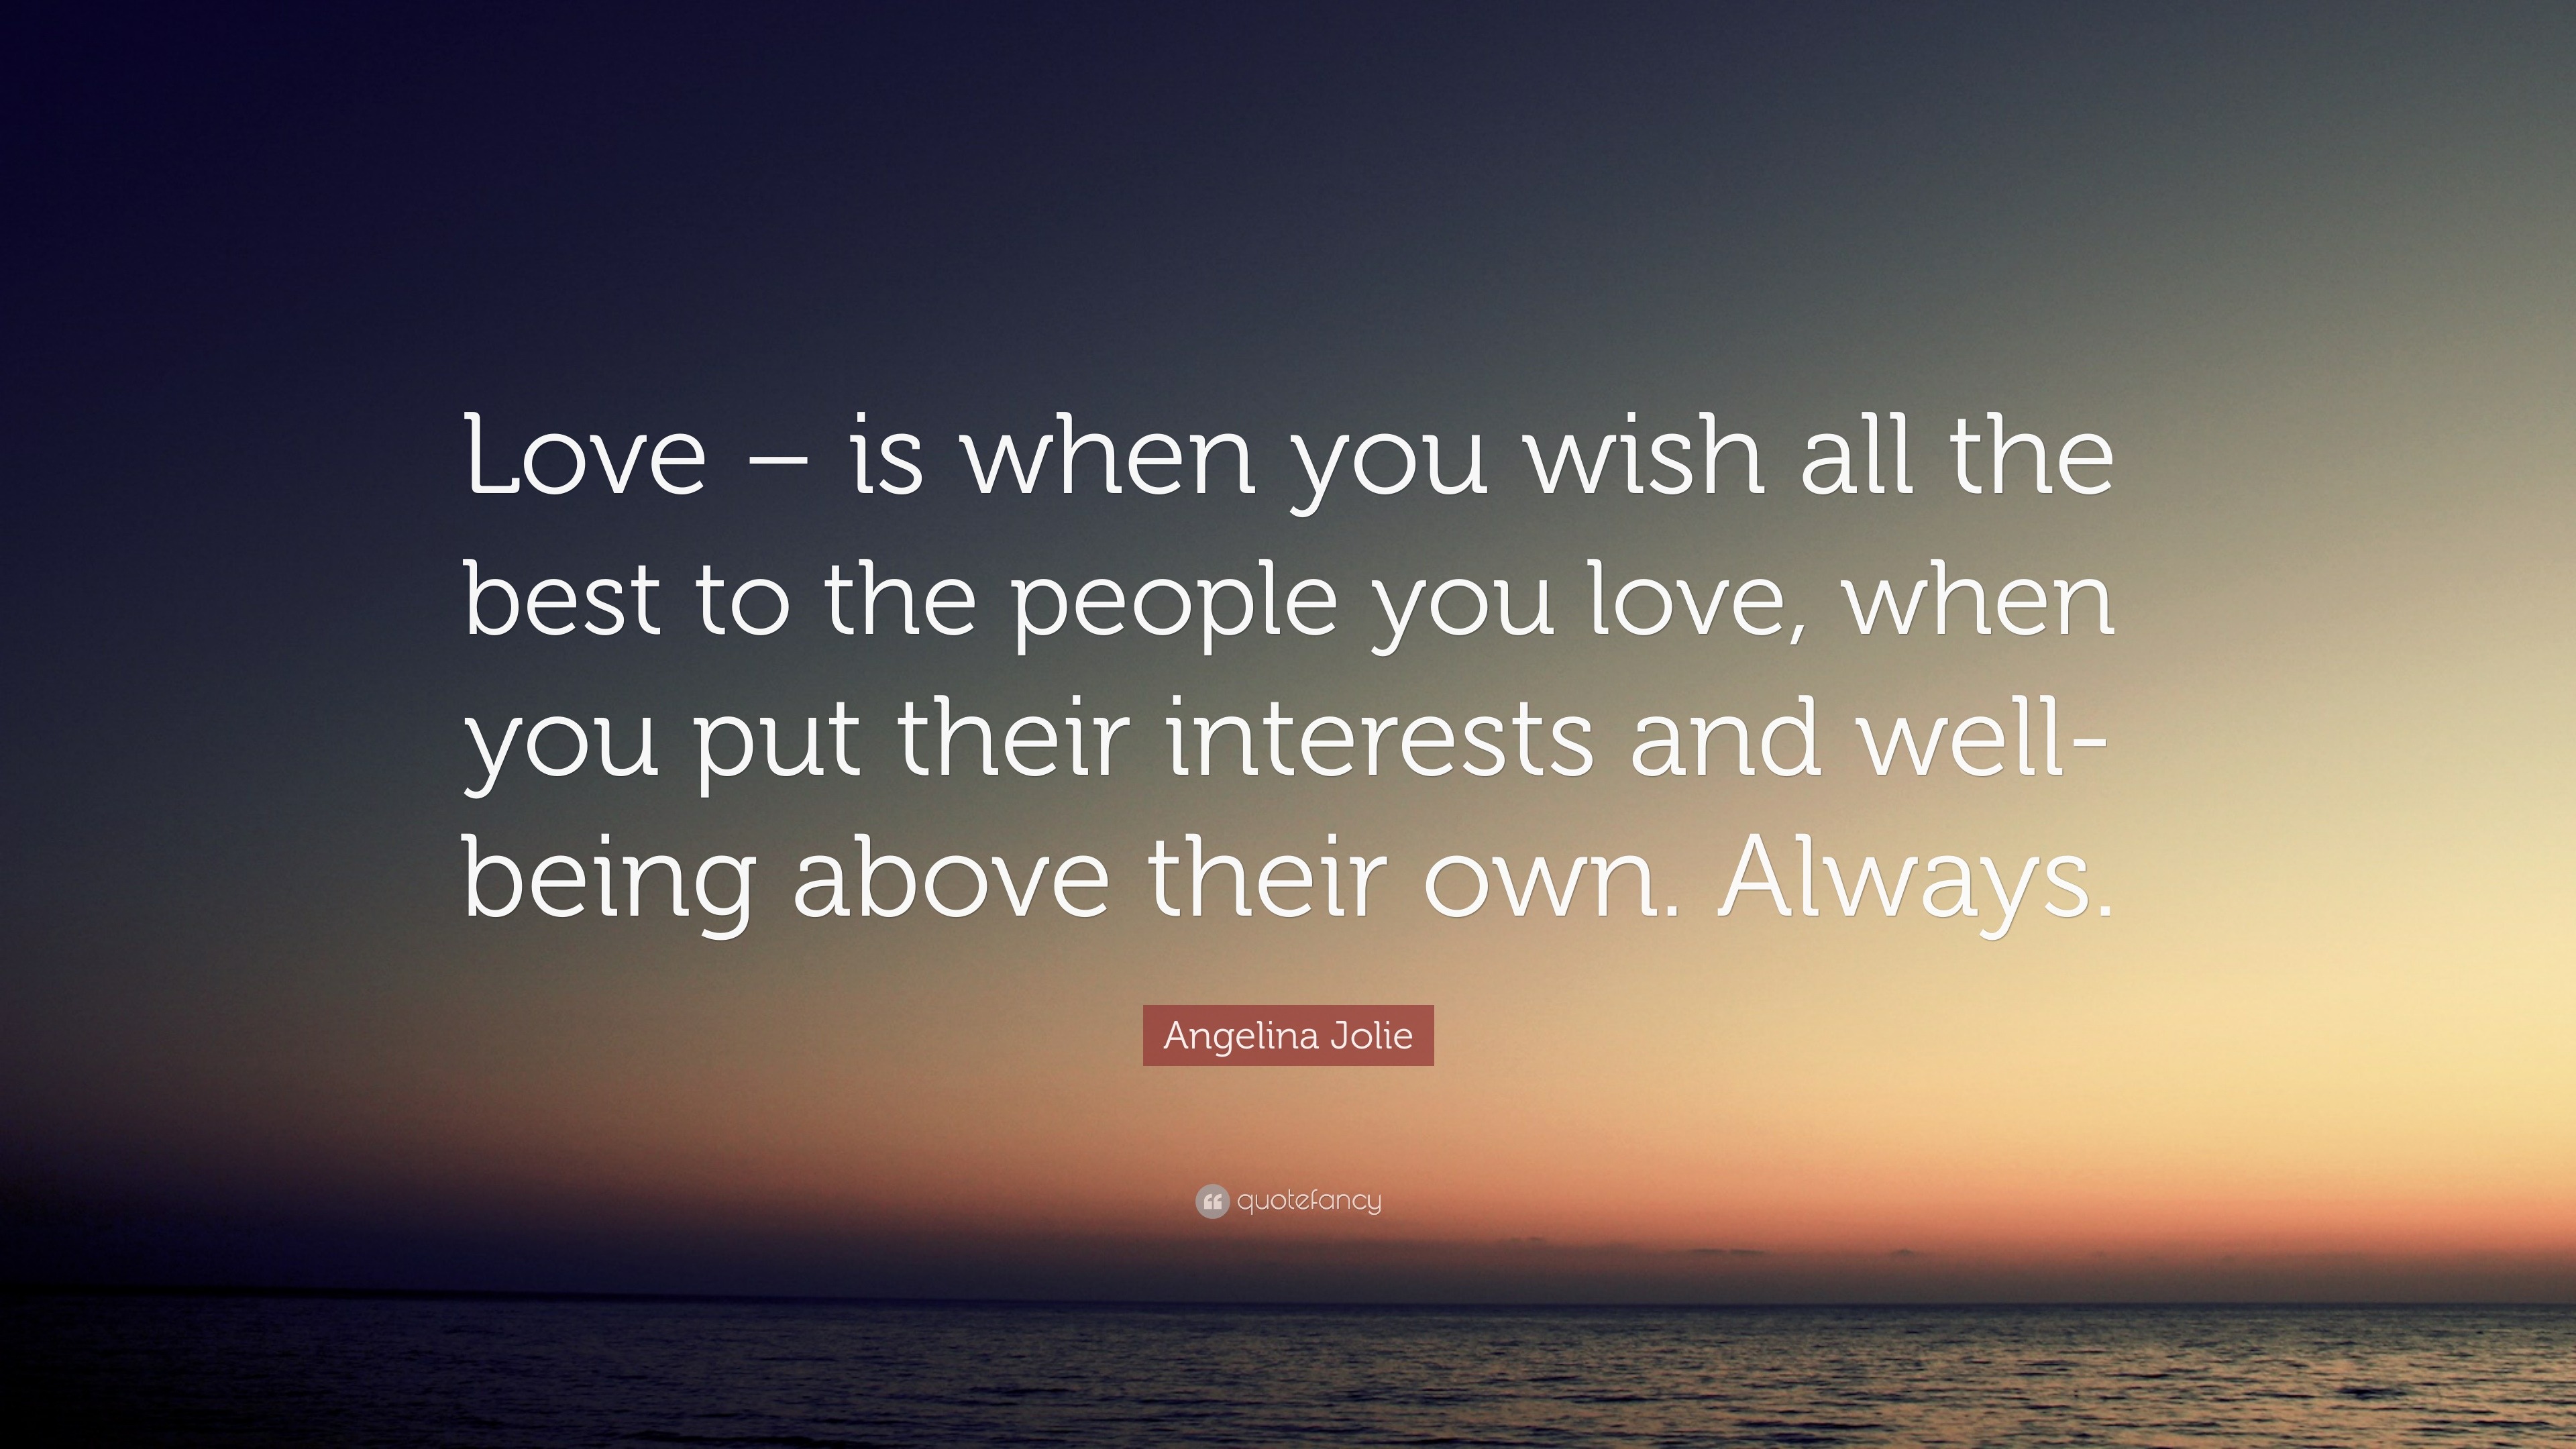 Angelina Jolie Quote: “Love – is when you wish all the best to the ...